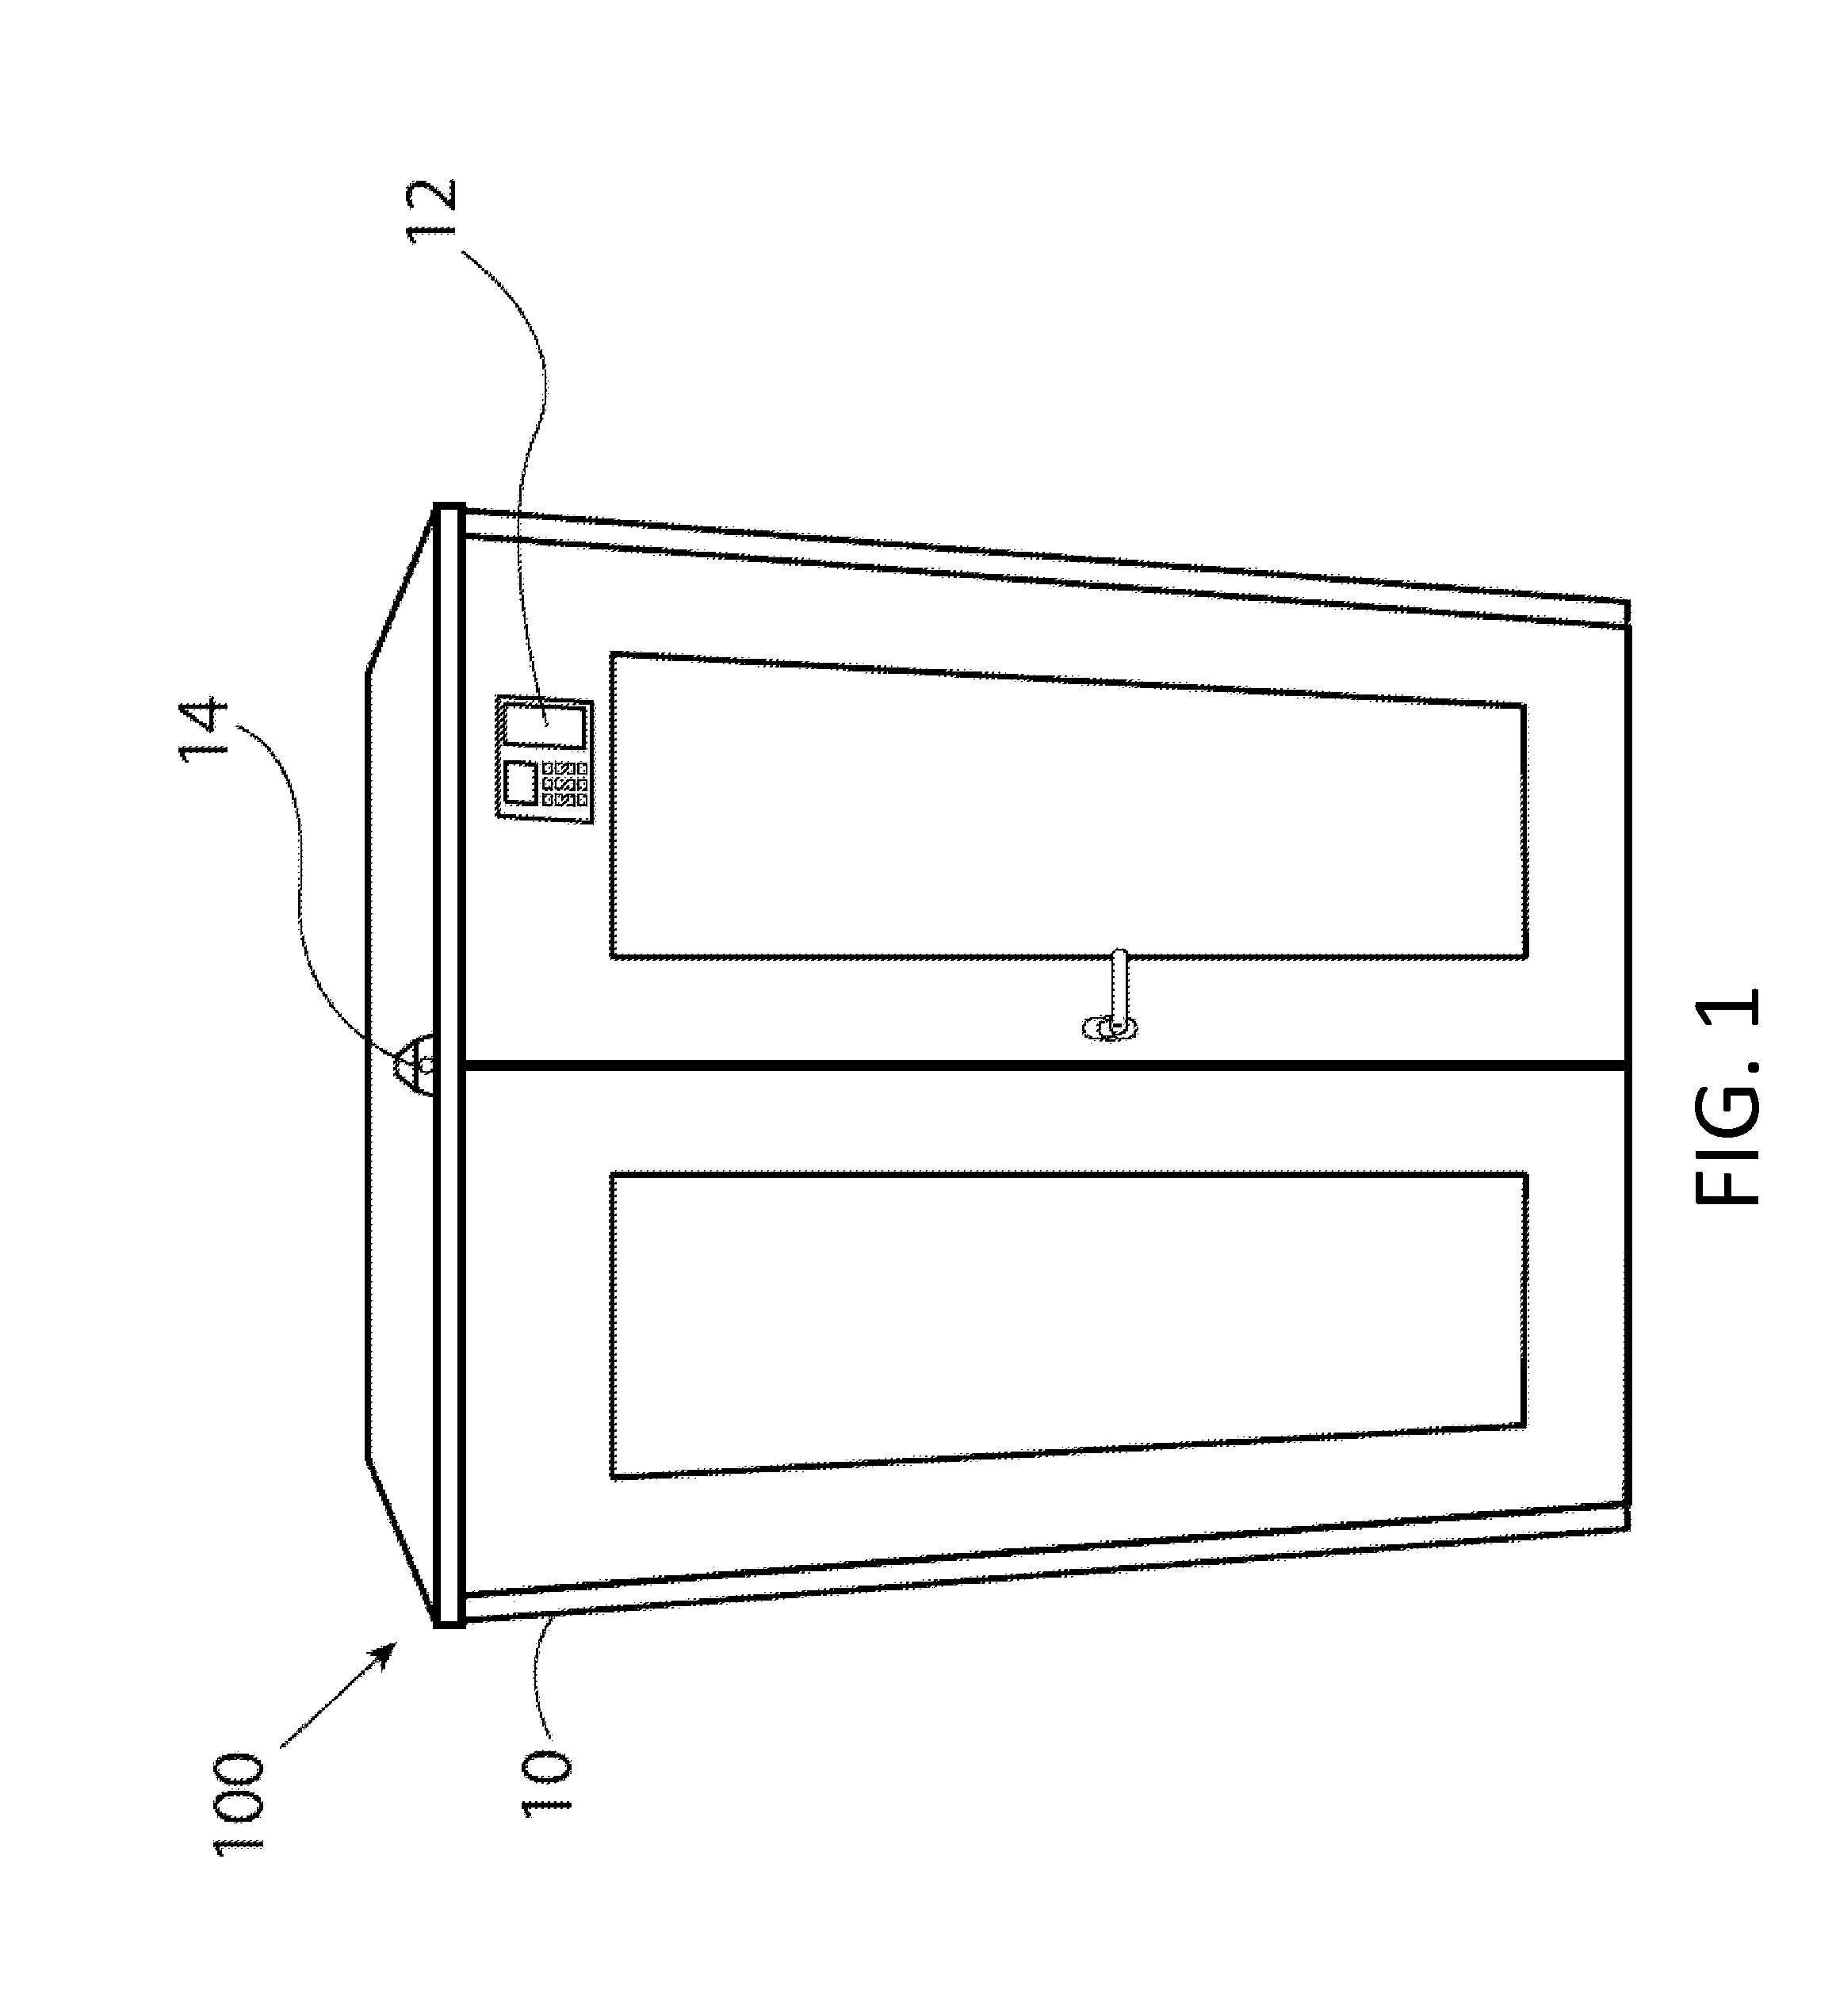 Storage container with inventory control